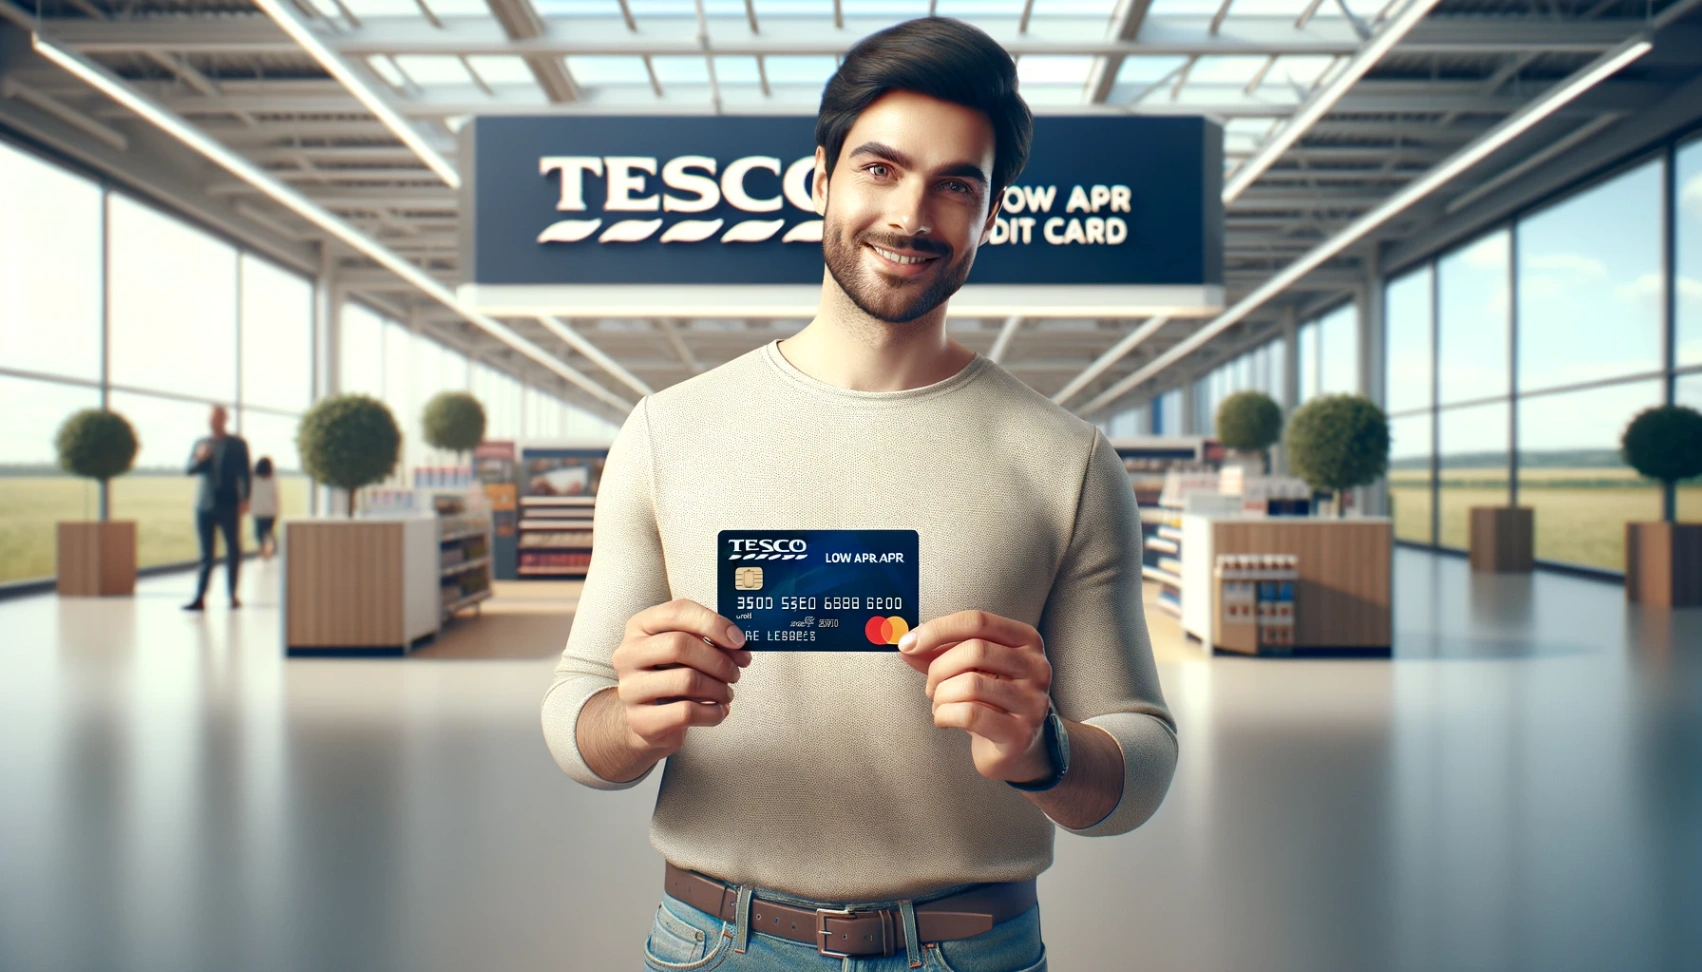 Step-by-Step to Tesco Low APR Card: Your Online Application Companion